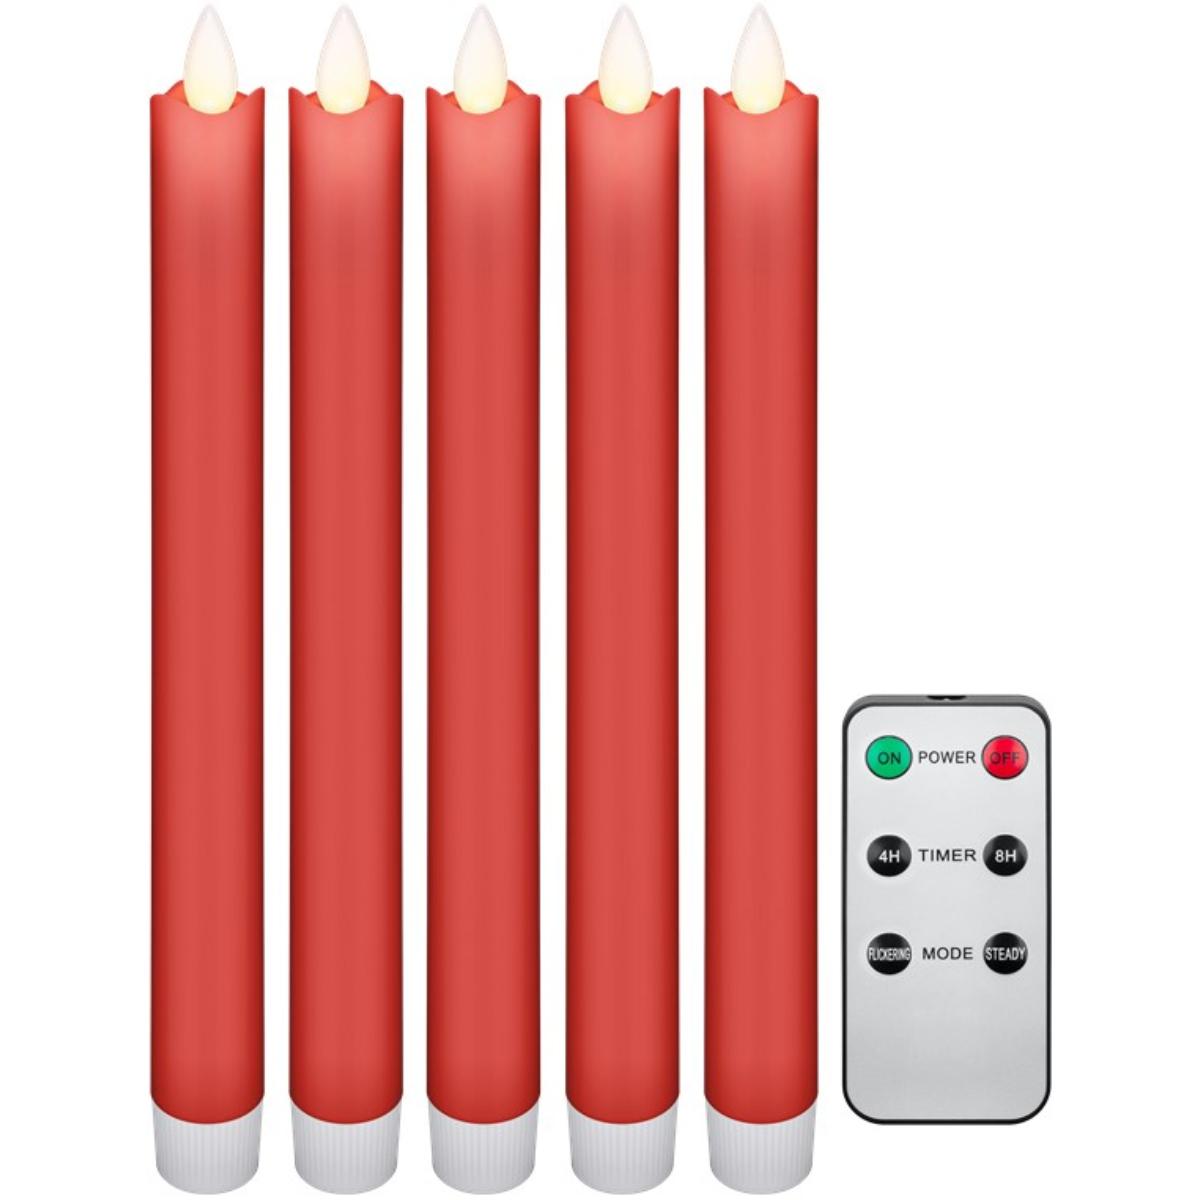 Set of 5 red LED real wax rod candles, incl. remote control Beautiful a